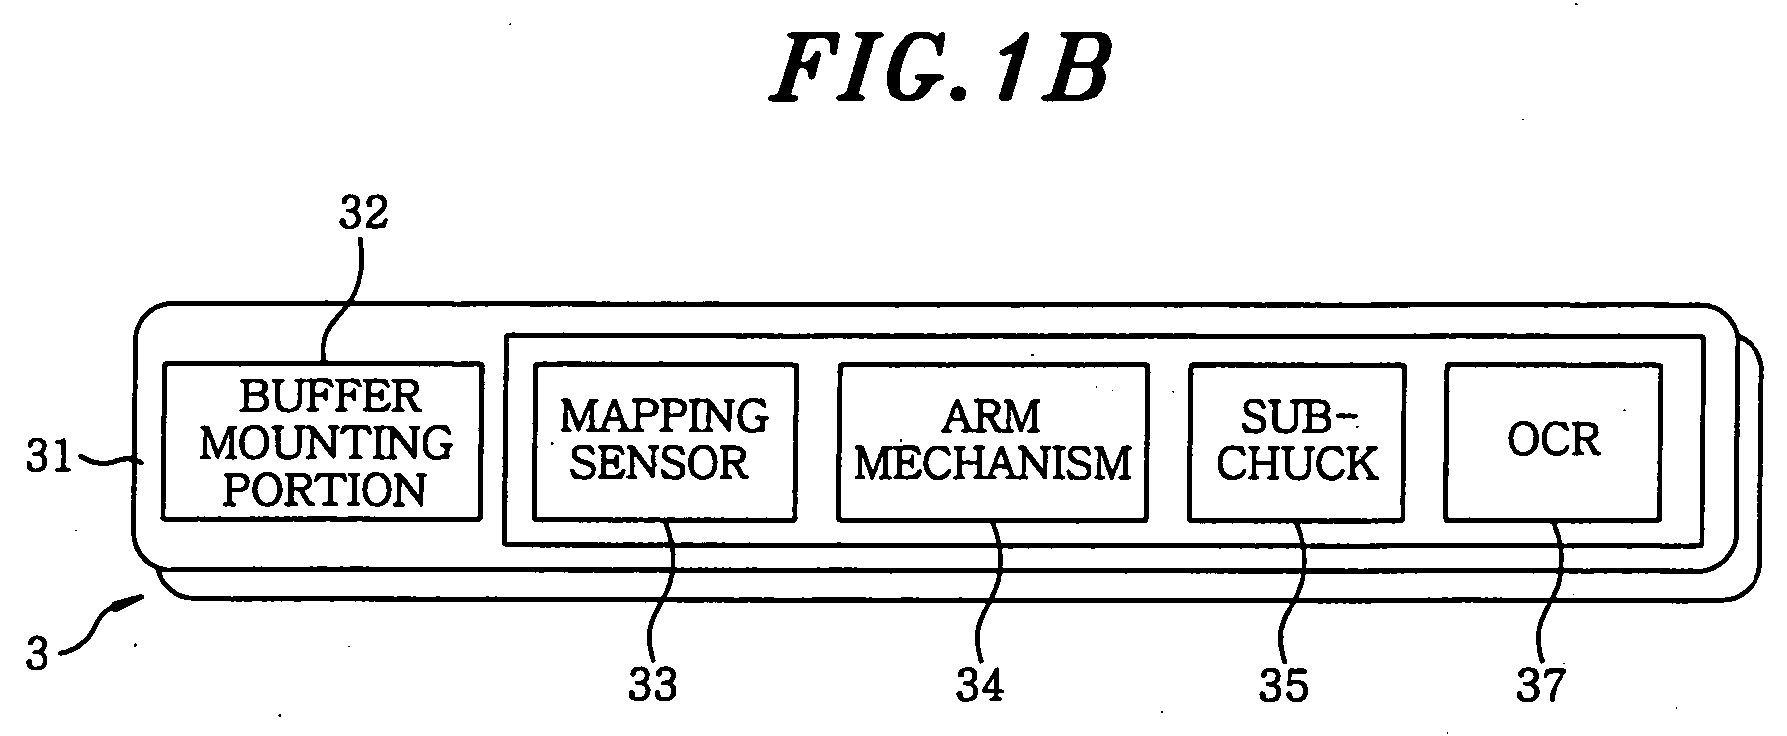 Transfer system and transfer method of object to be processed